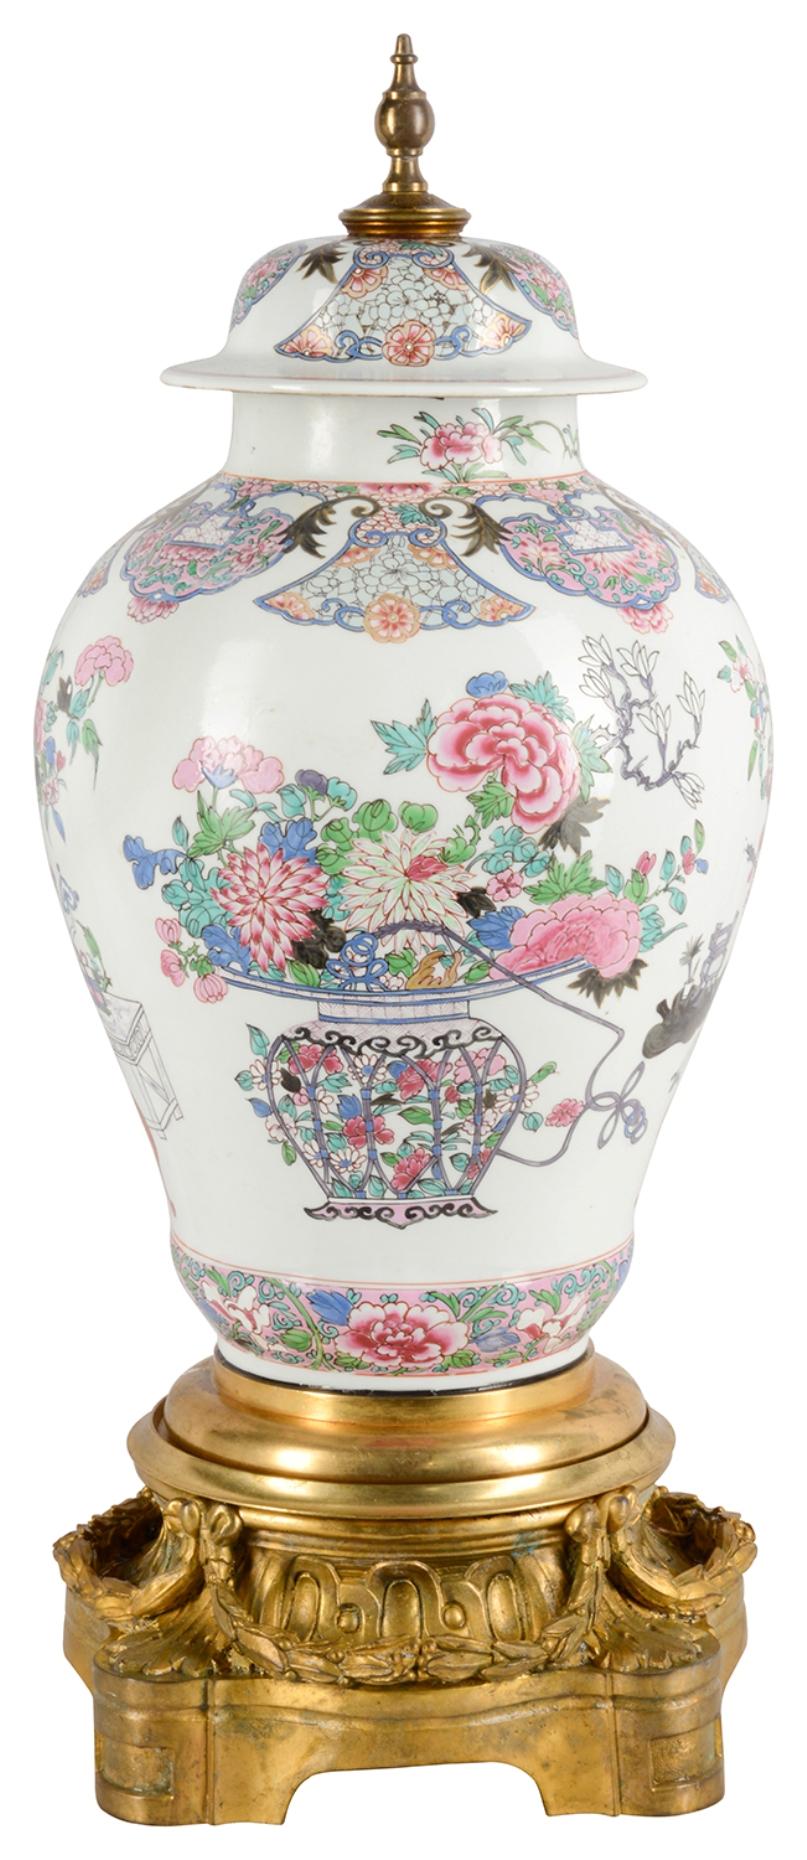 A very good quality late 19th century Famille Rose style porcelain lidded vase / lamp. Having wonderful colorful floral and motif decoration with scenes of vases with exotic flowers. Mounted on an impressive gilded ormolu base.
Batch 40b G9077/20